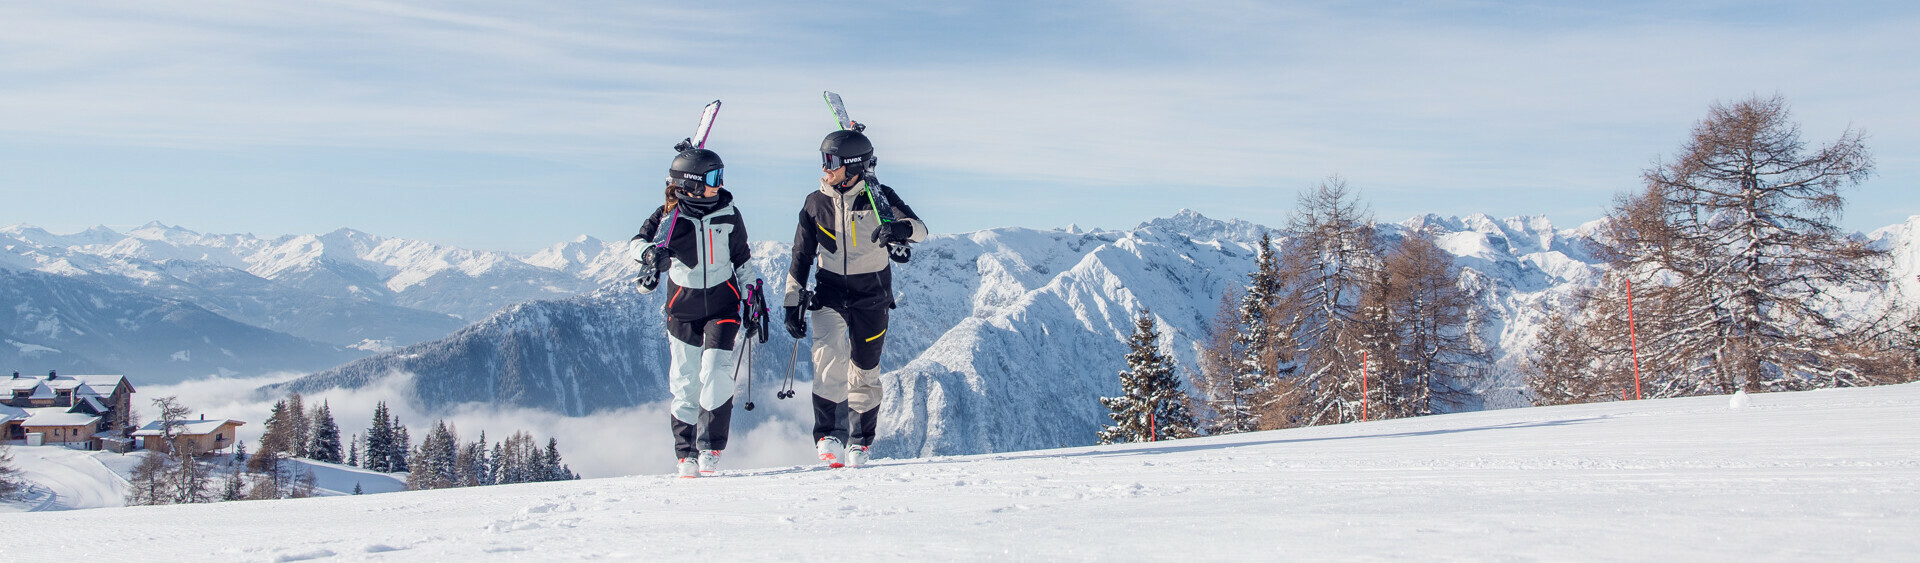 Skiers enjoy the sunny winter day on the perfectly groomed slopes of the Rofan mountains, backdropped by the snow-covered Nature Park Karwendel.